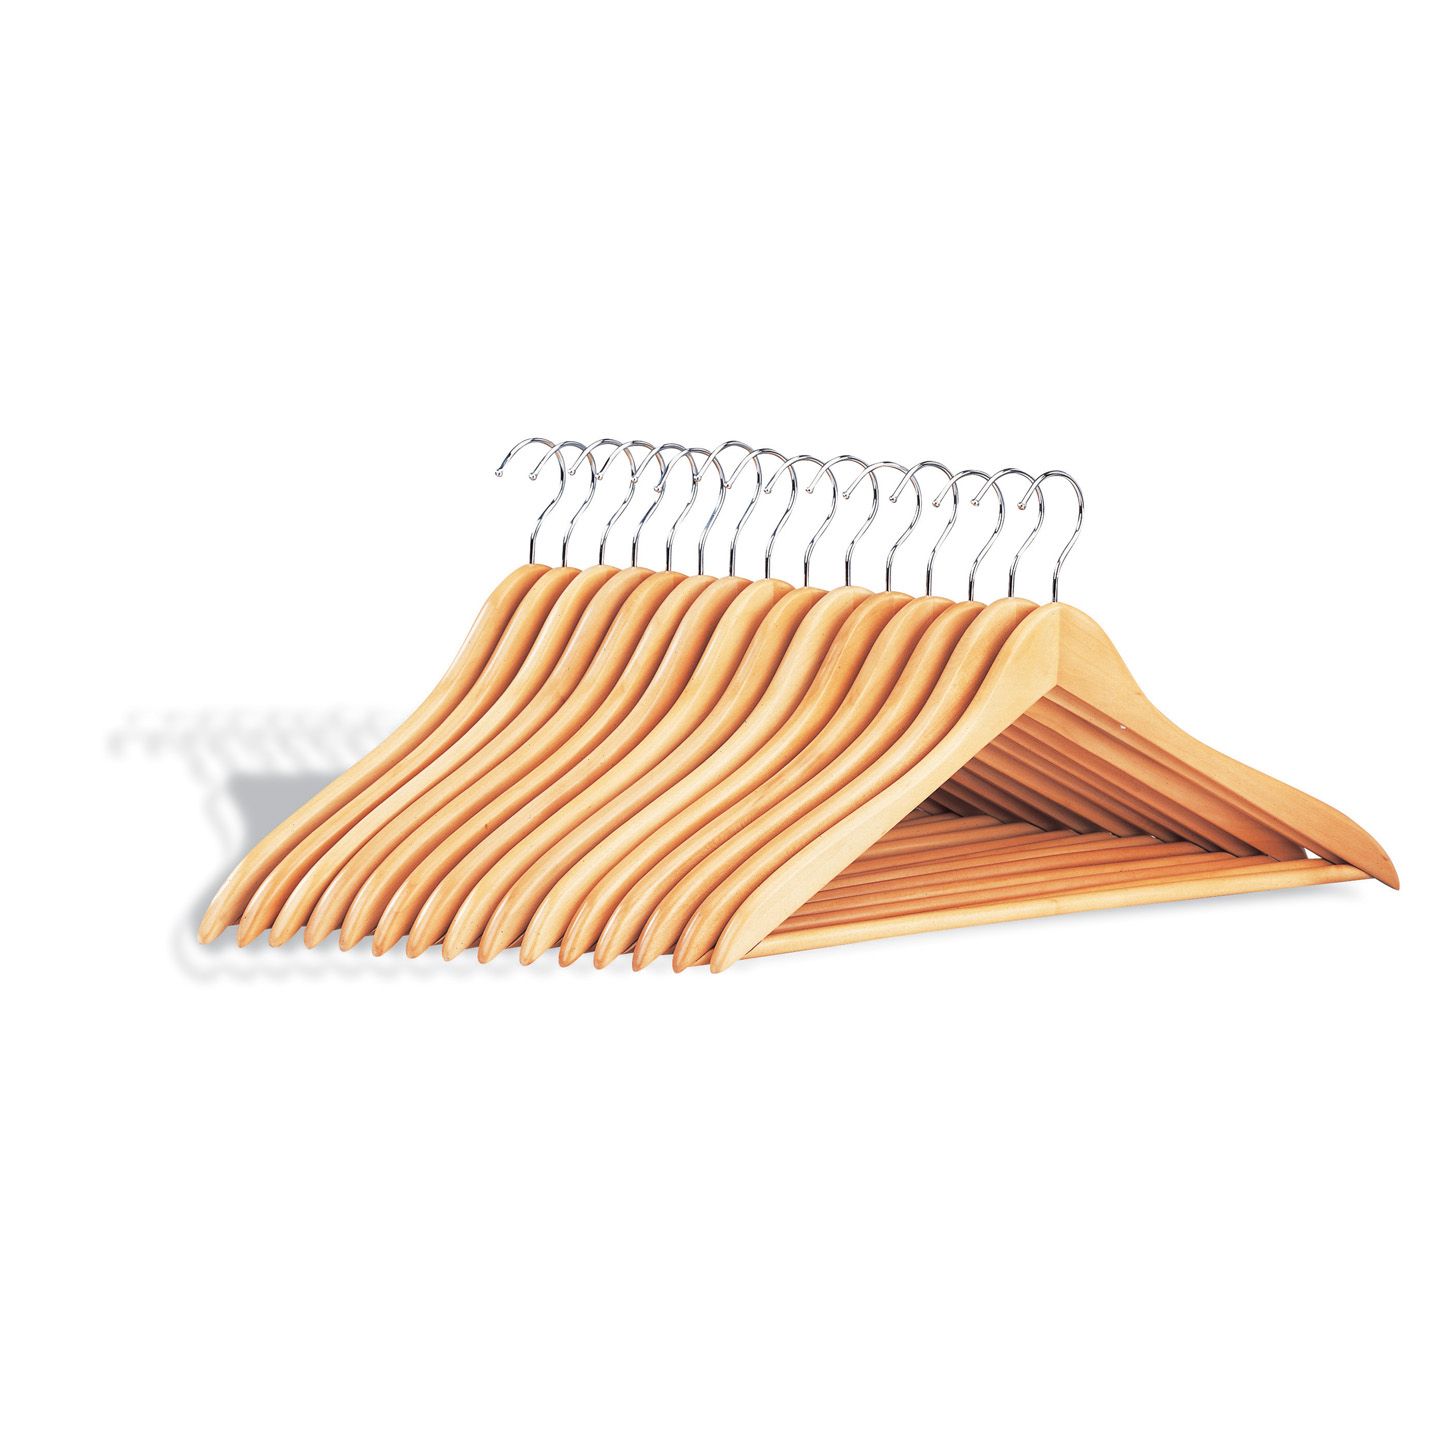 Organize It All 15-Pack Of Wood Hangers With Slack/Dress Bar